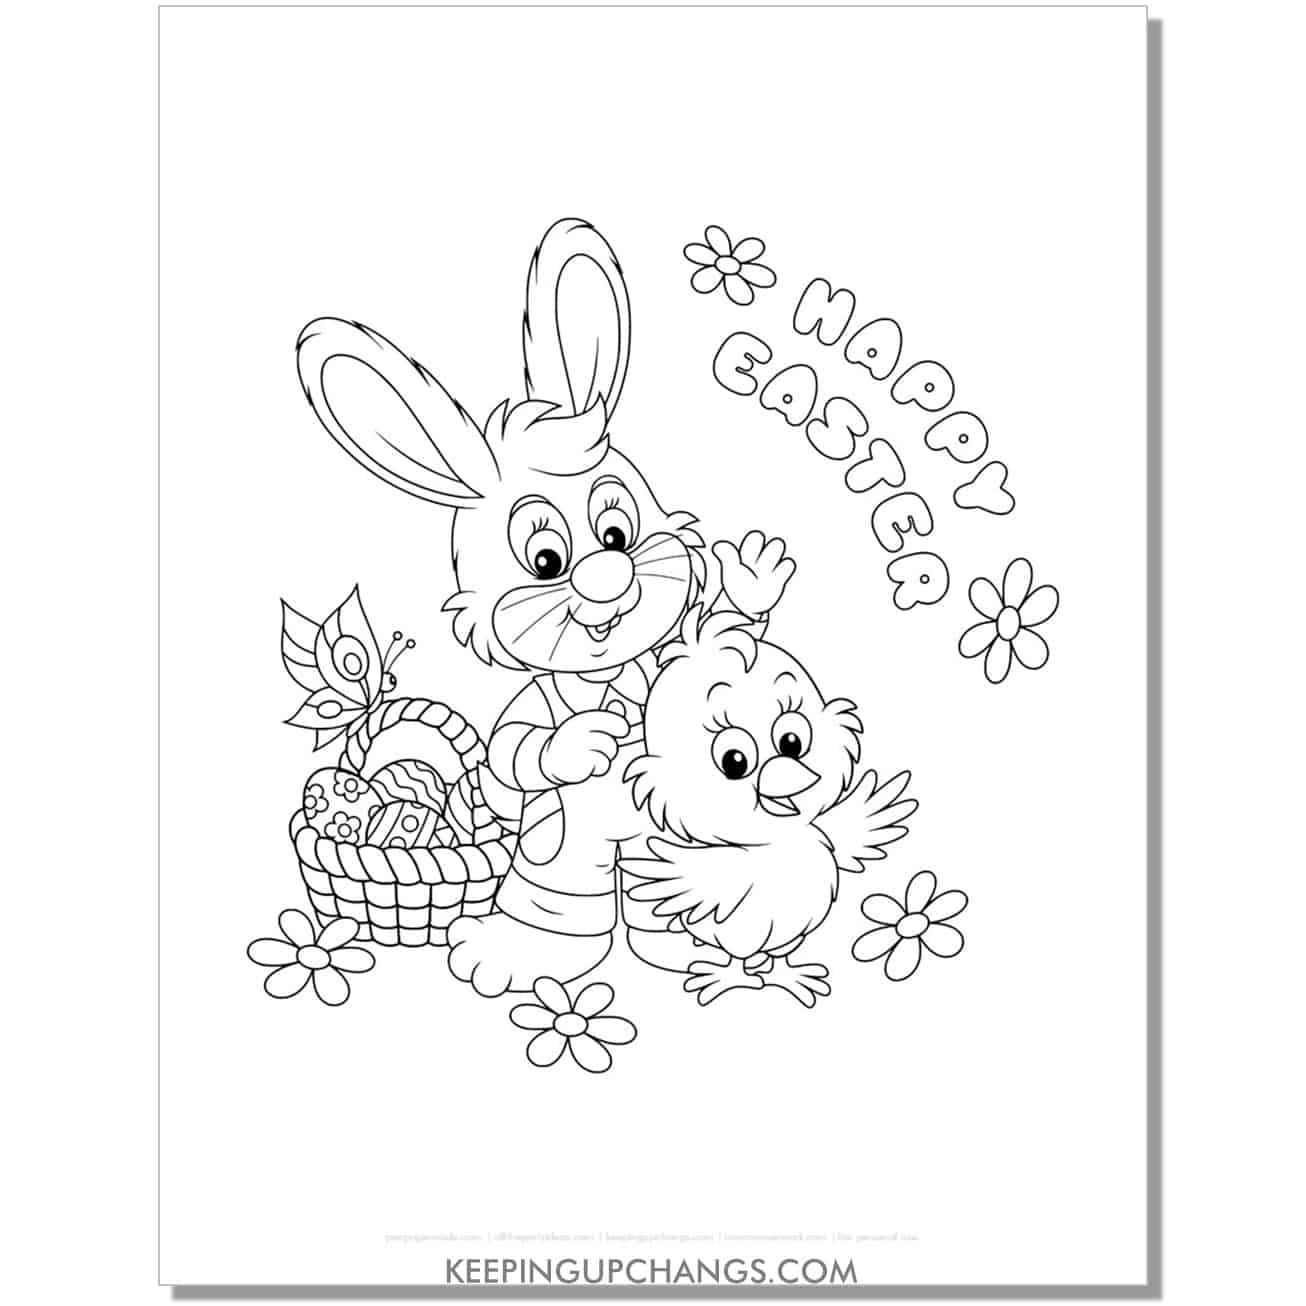 happy easter bunny and chick coloring page, sheet.